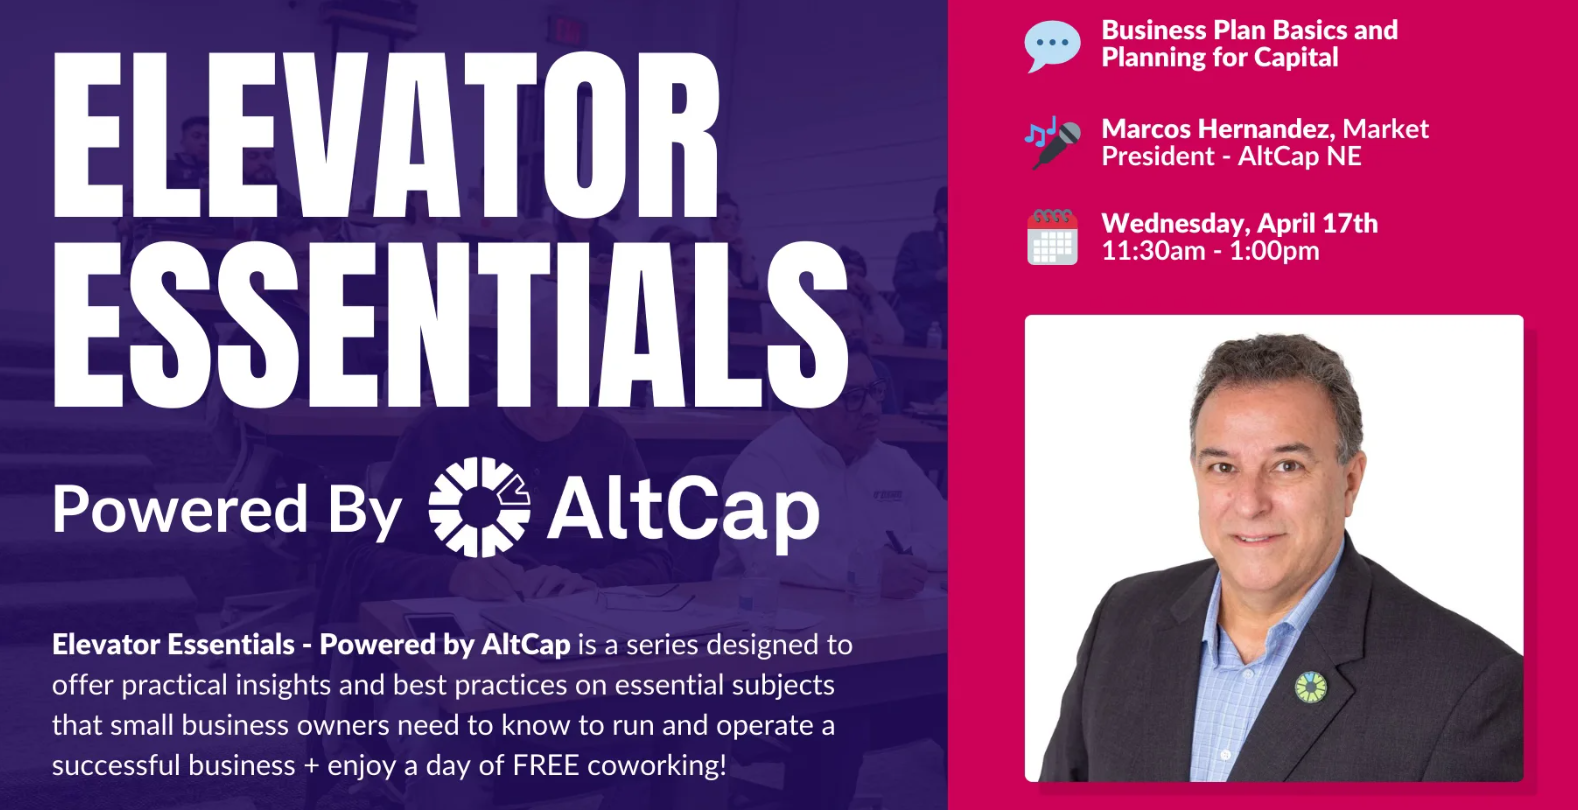 Elevator Essentials Powered by AltCap - Business Plan Basics and Planning for Capital